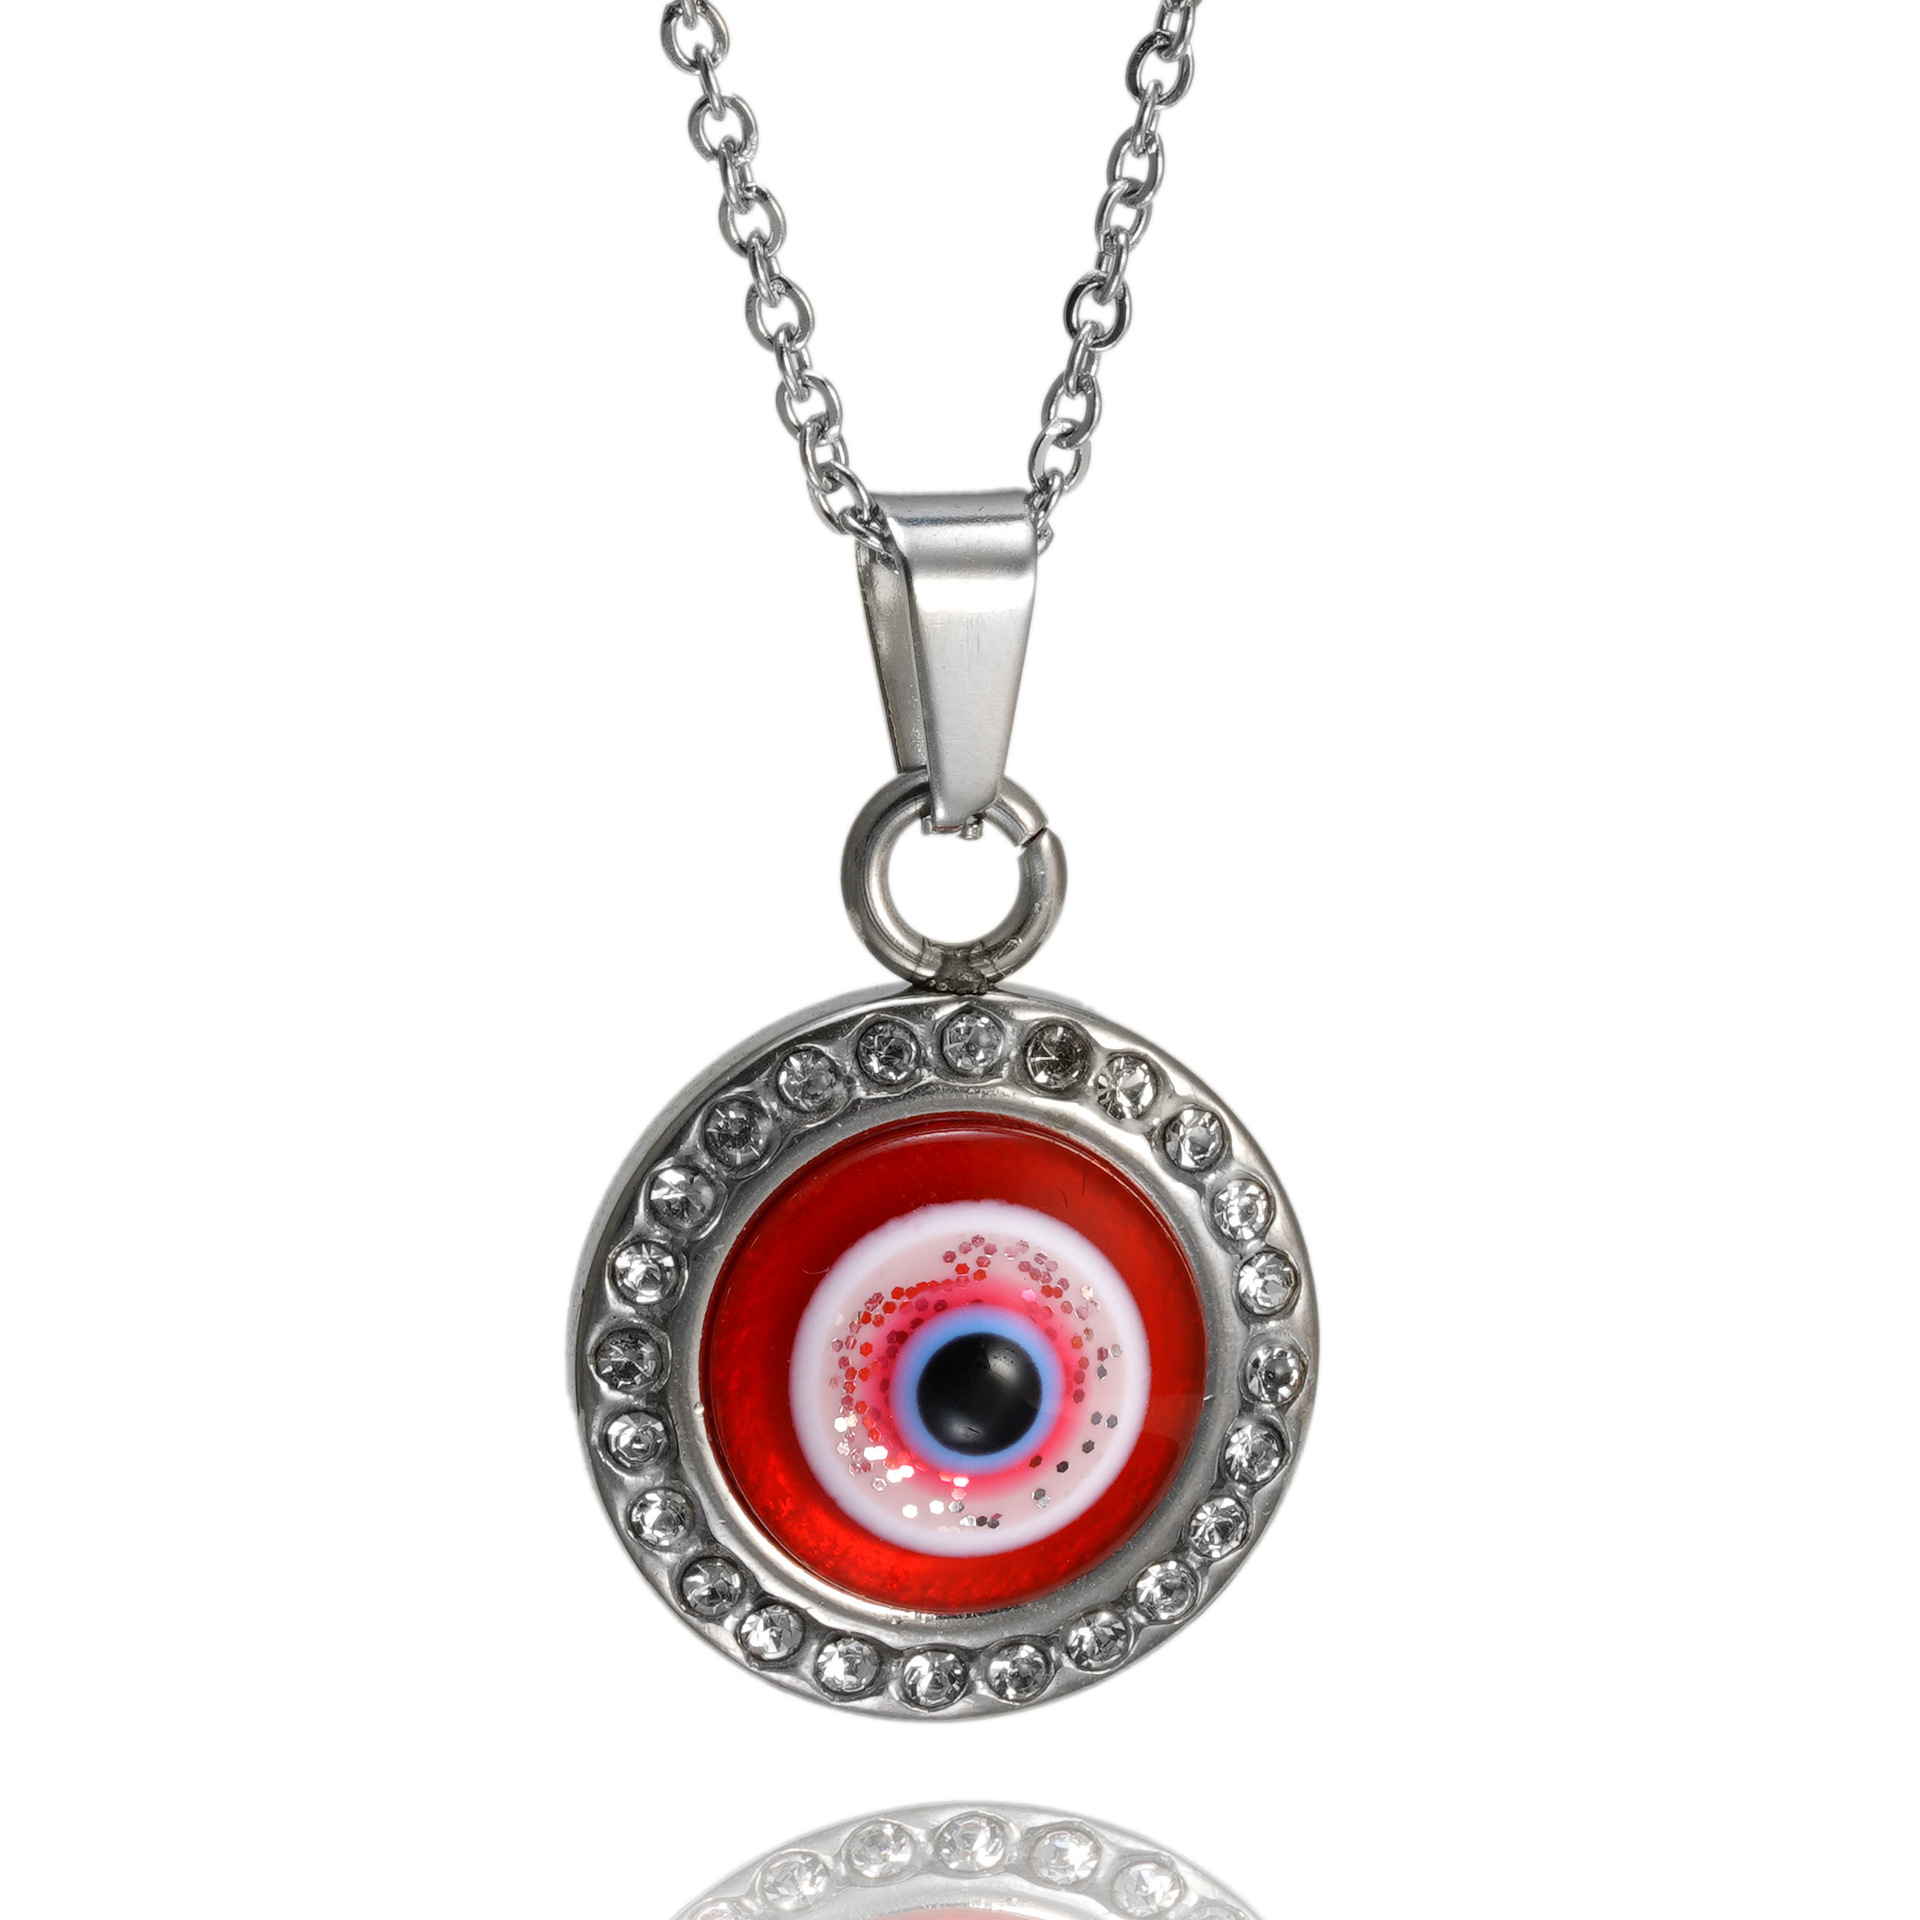 5:Steel red eye necklace